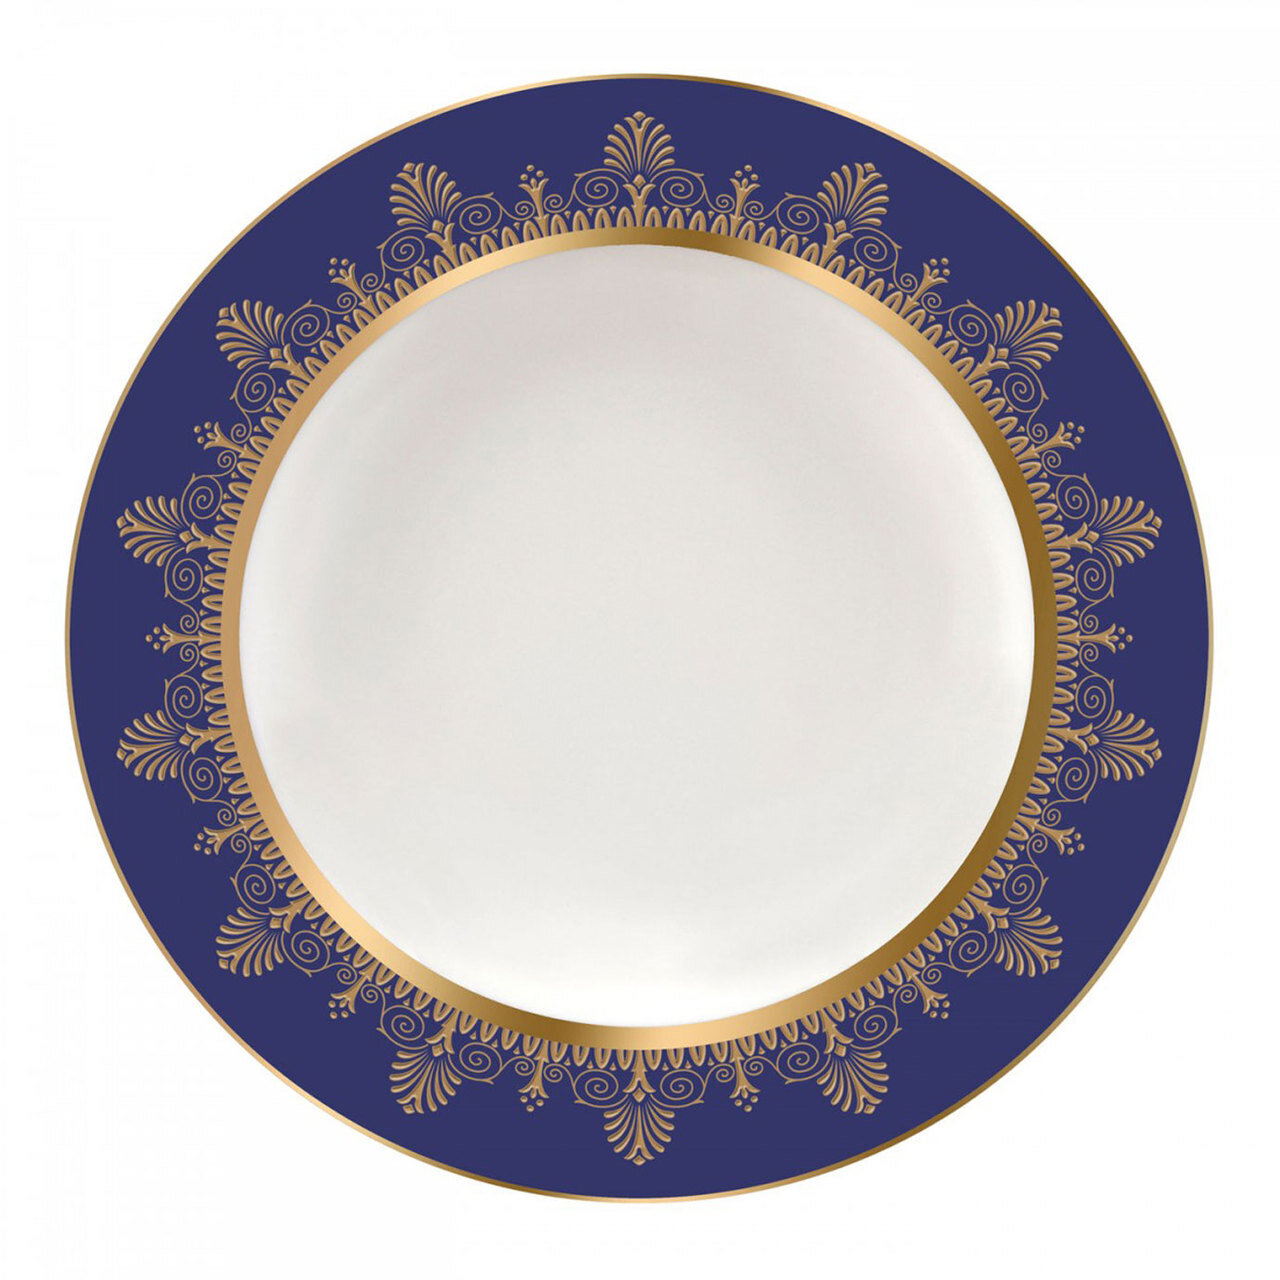 Wedgwood Anthemion Blue Rim Soup Plate 9 Inch